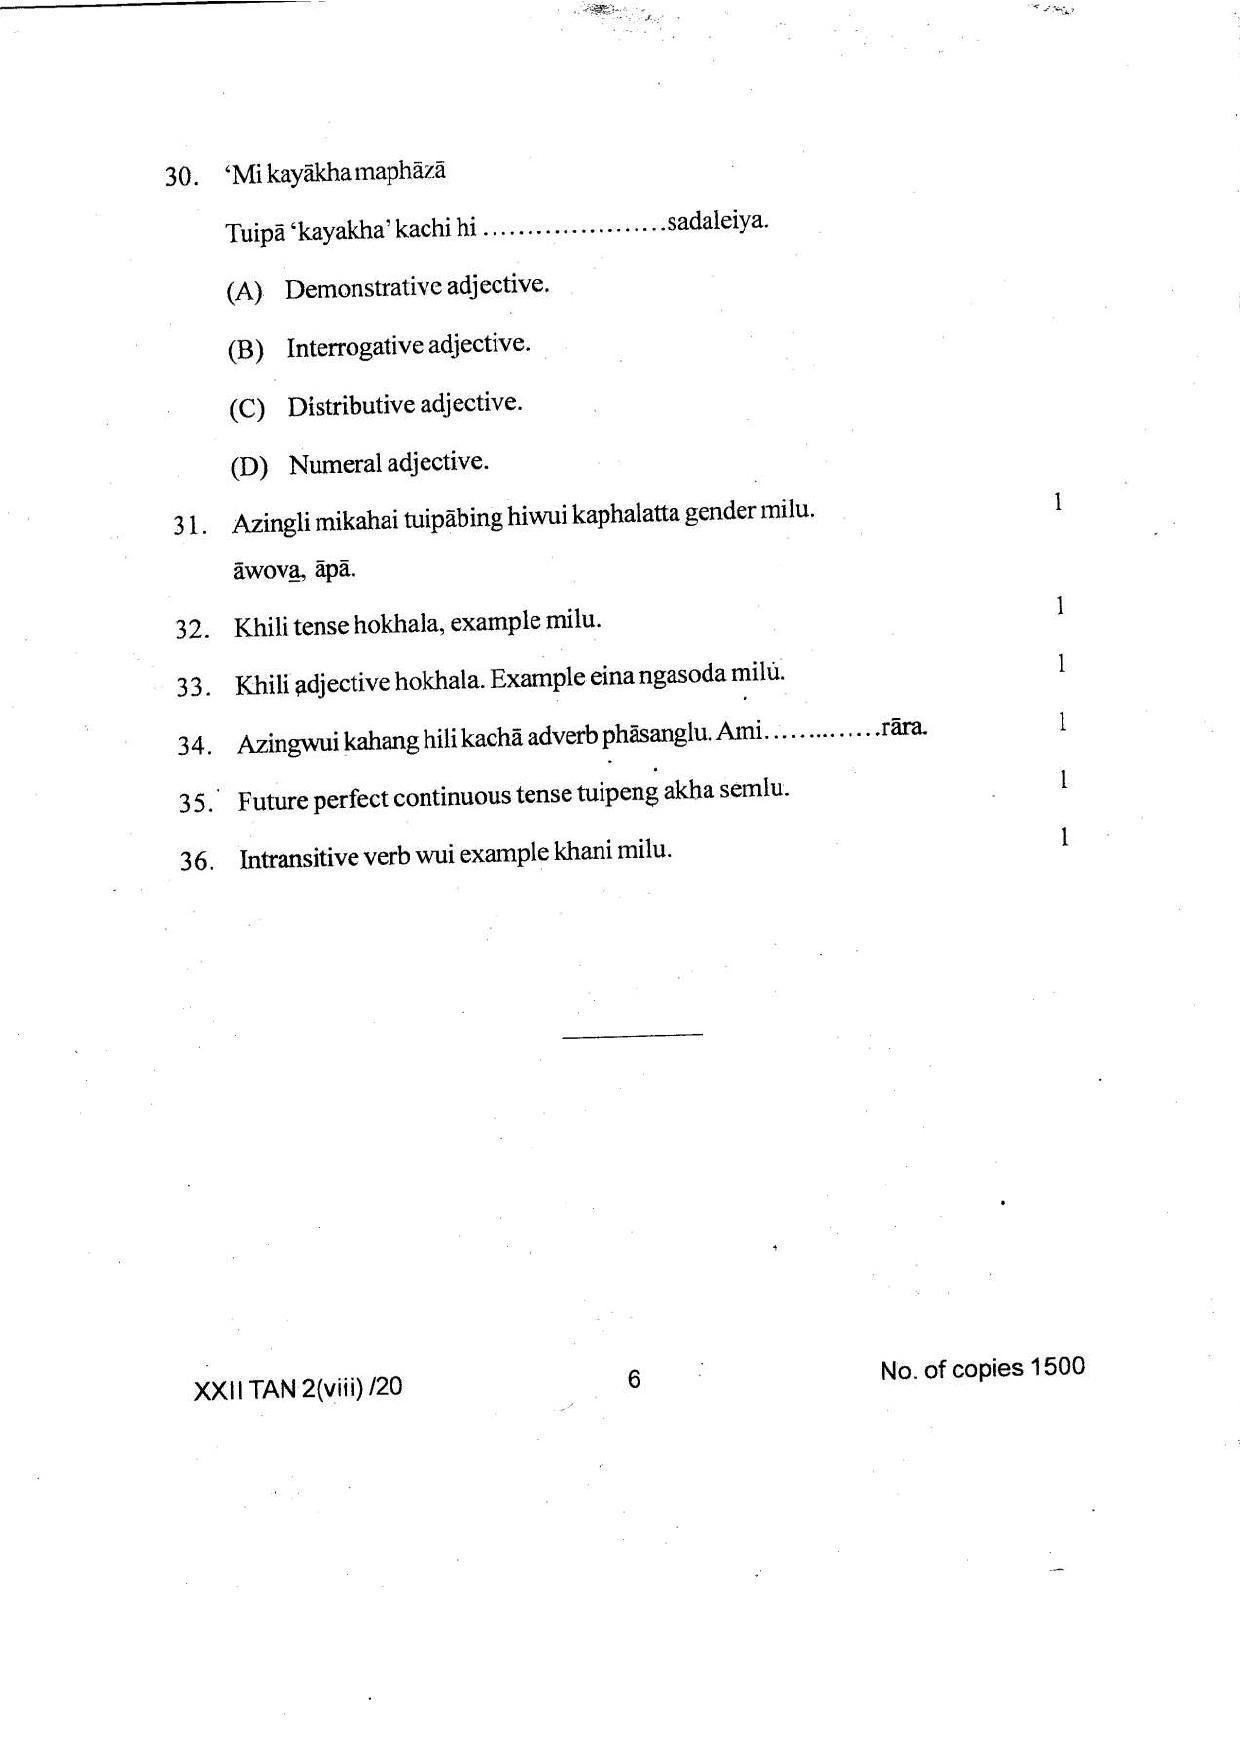 COHSEM Class 12 Tangkhul Question Papers 2020 - Page 6